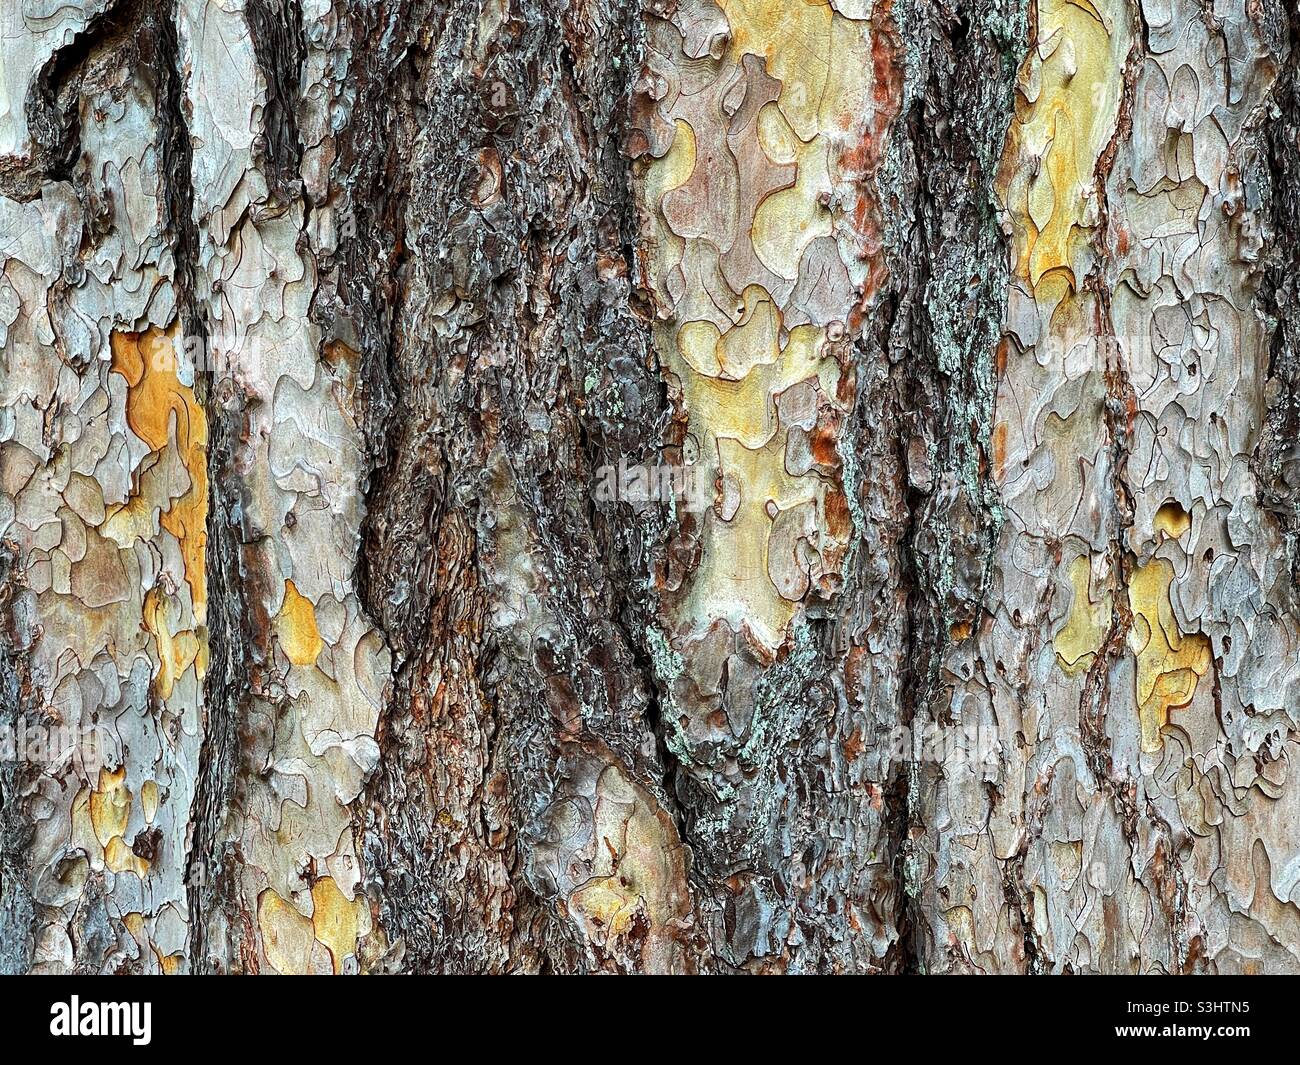 Closeup view of bark on the trunk of a mature tree Stock Photo